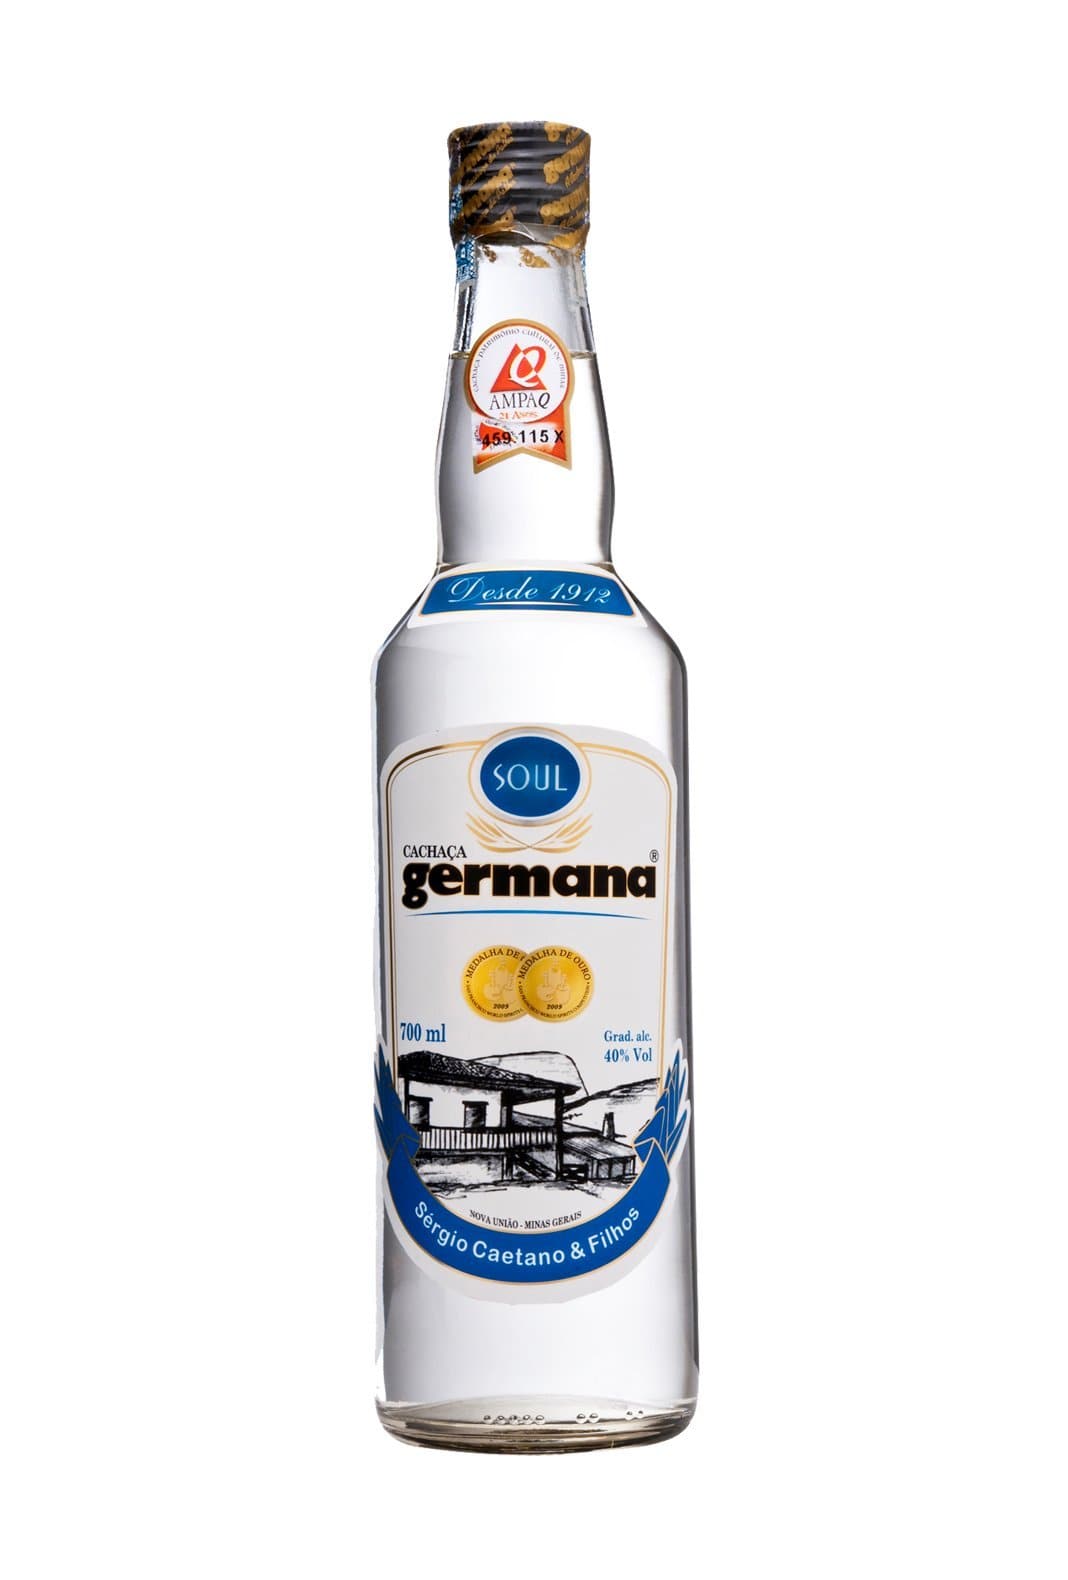 Germana Cachaca Soul (White) 40% 700ml | Alcoholic Beverages | Shop online at Spirits of France